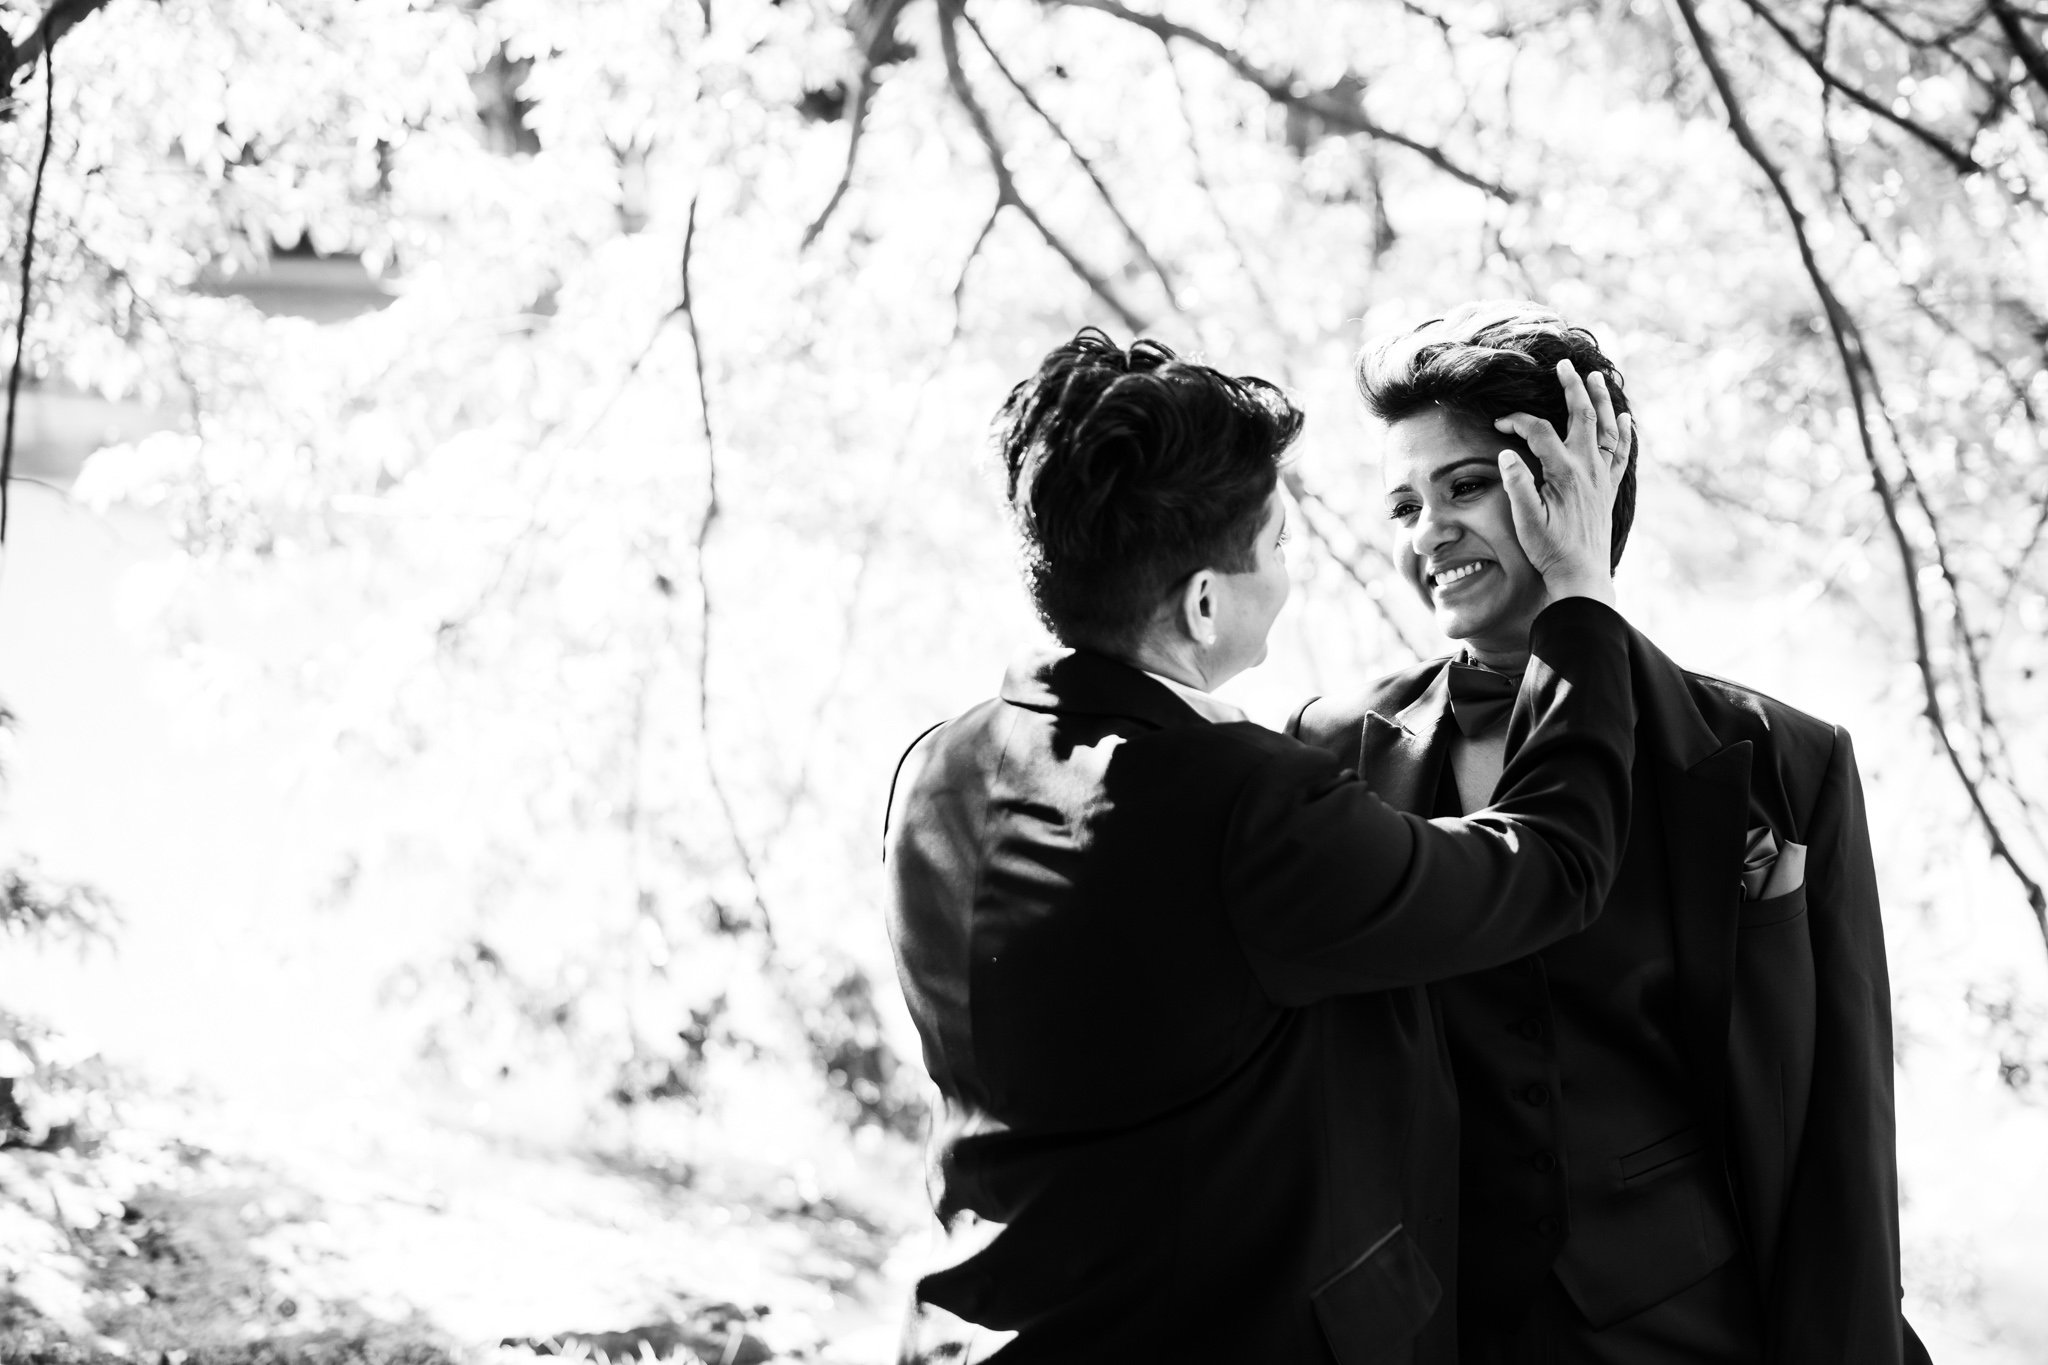 outdoor wedding image couple facing each other one partner fixing the others hair black and white.jpg